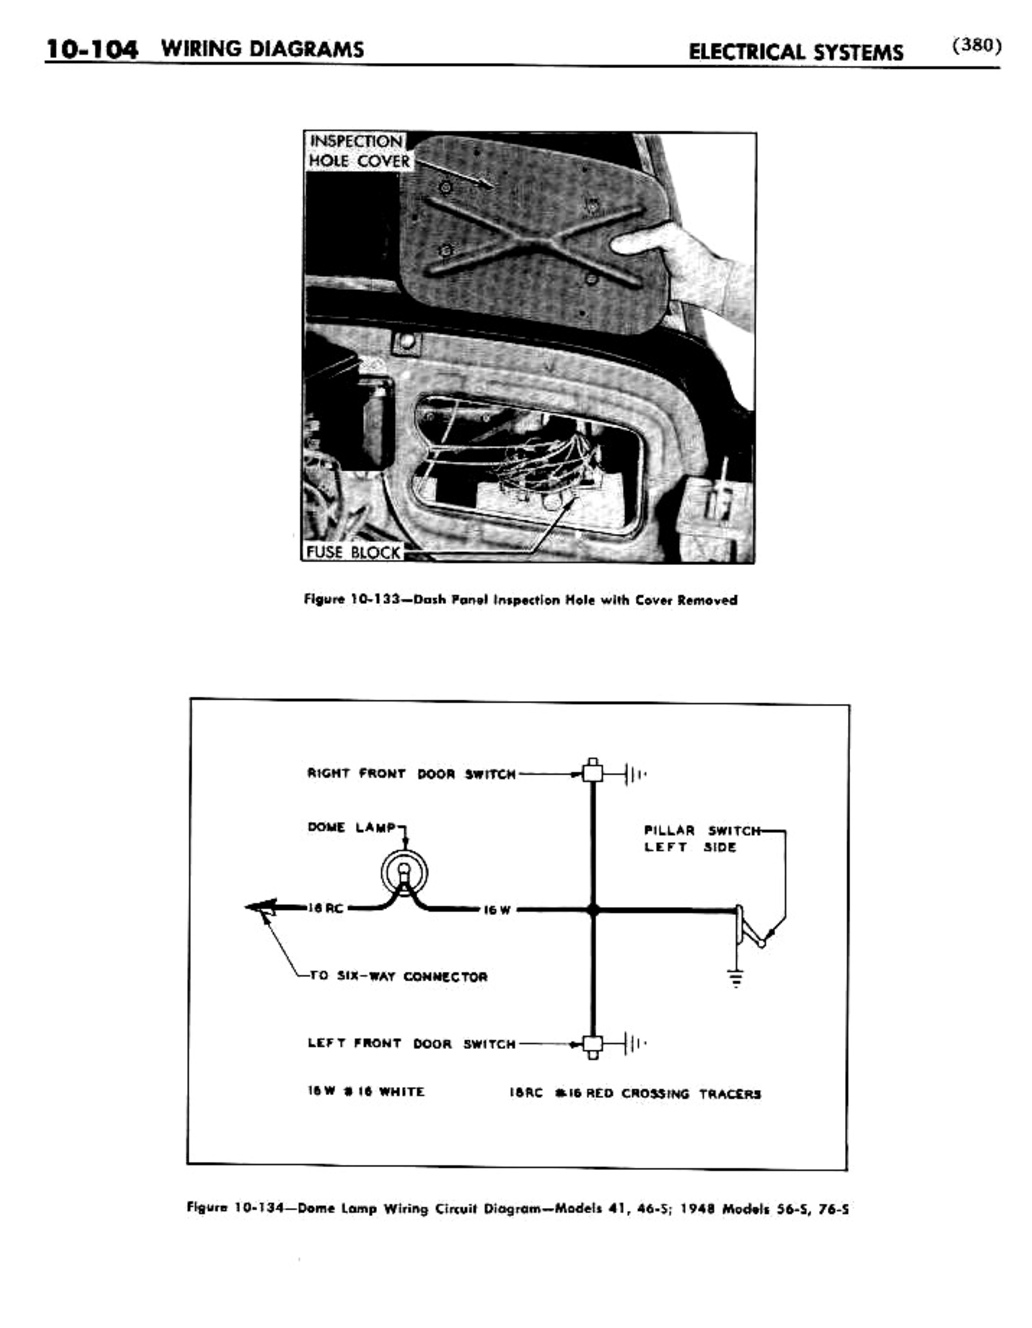 n_11 1948 Buick Shop Manual - Electrical Systems-104-104.jpg